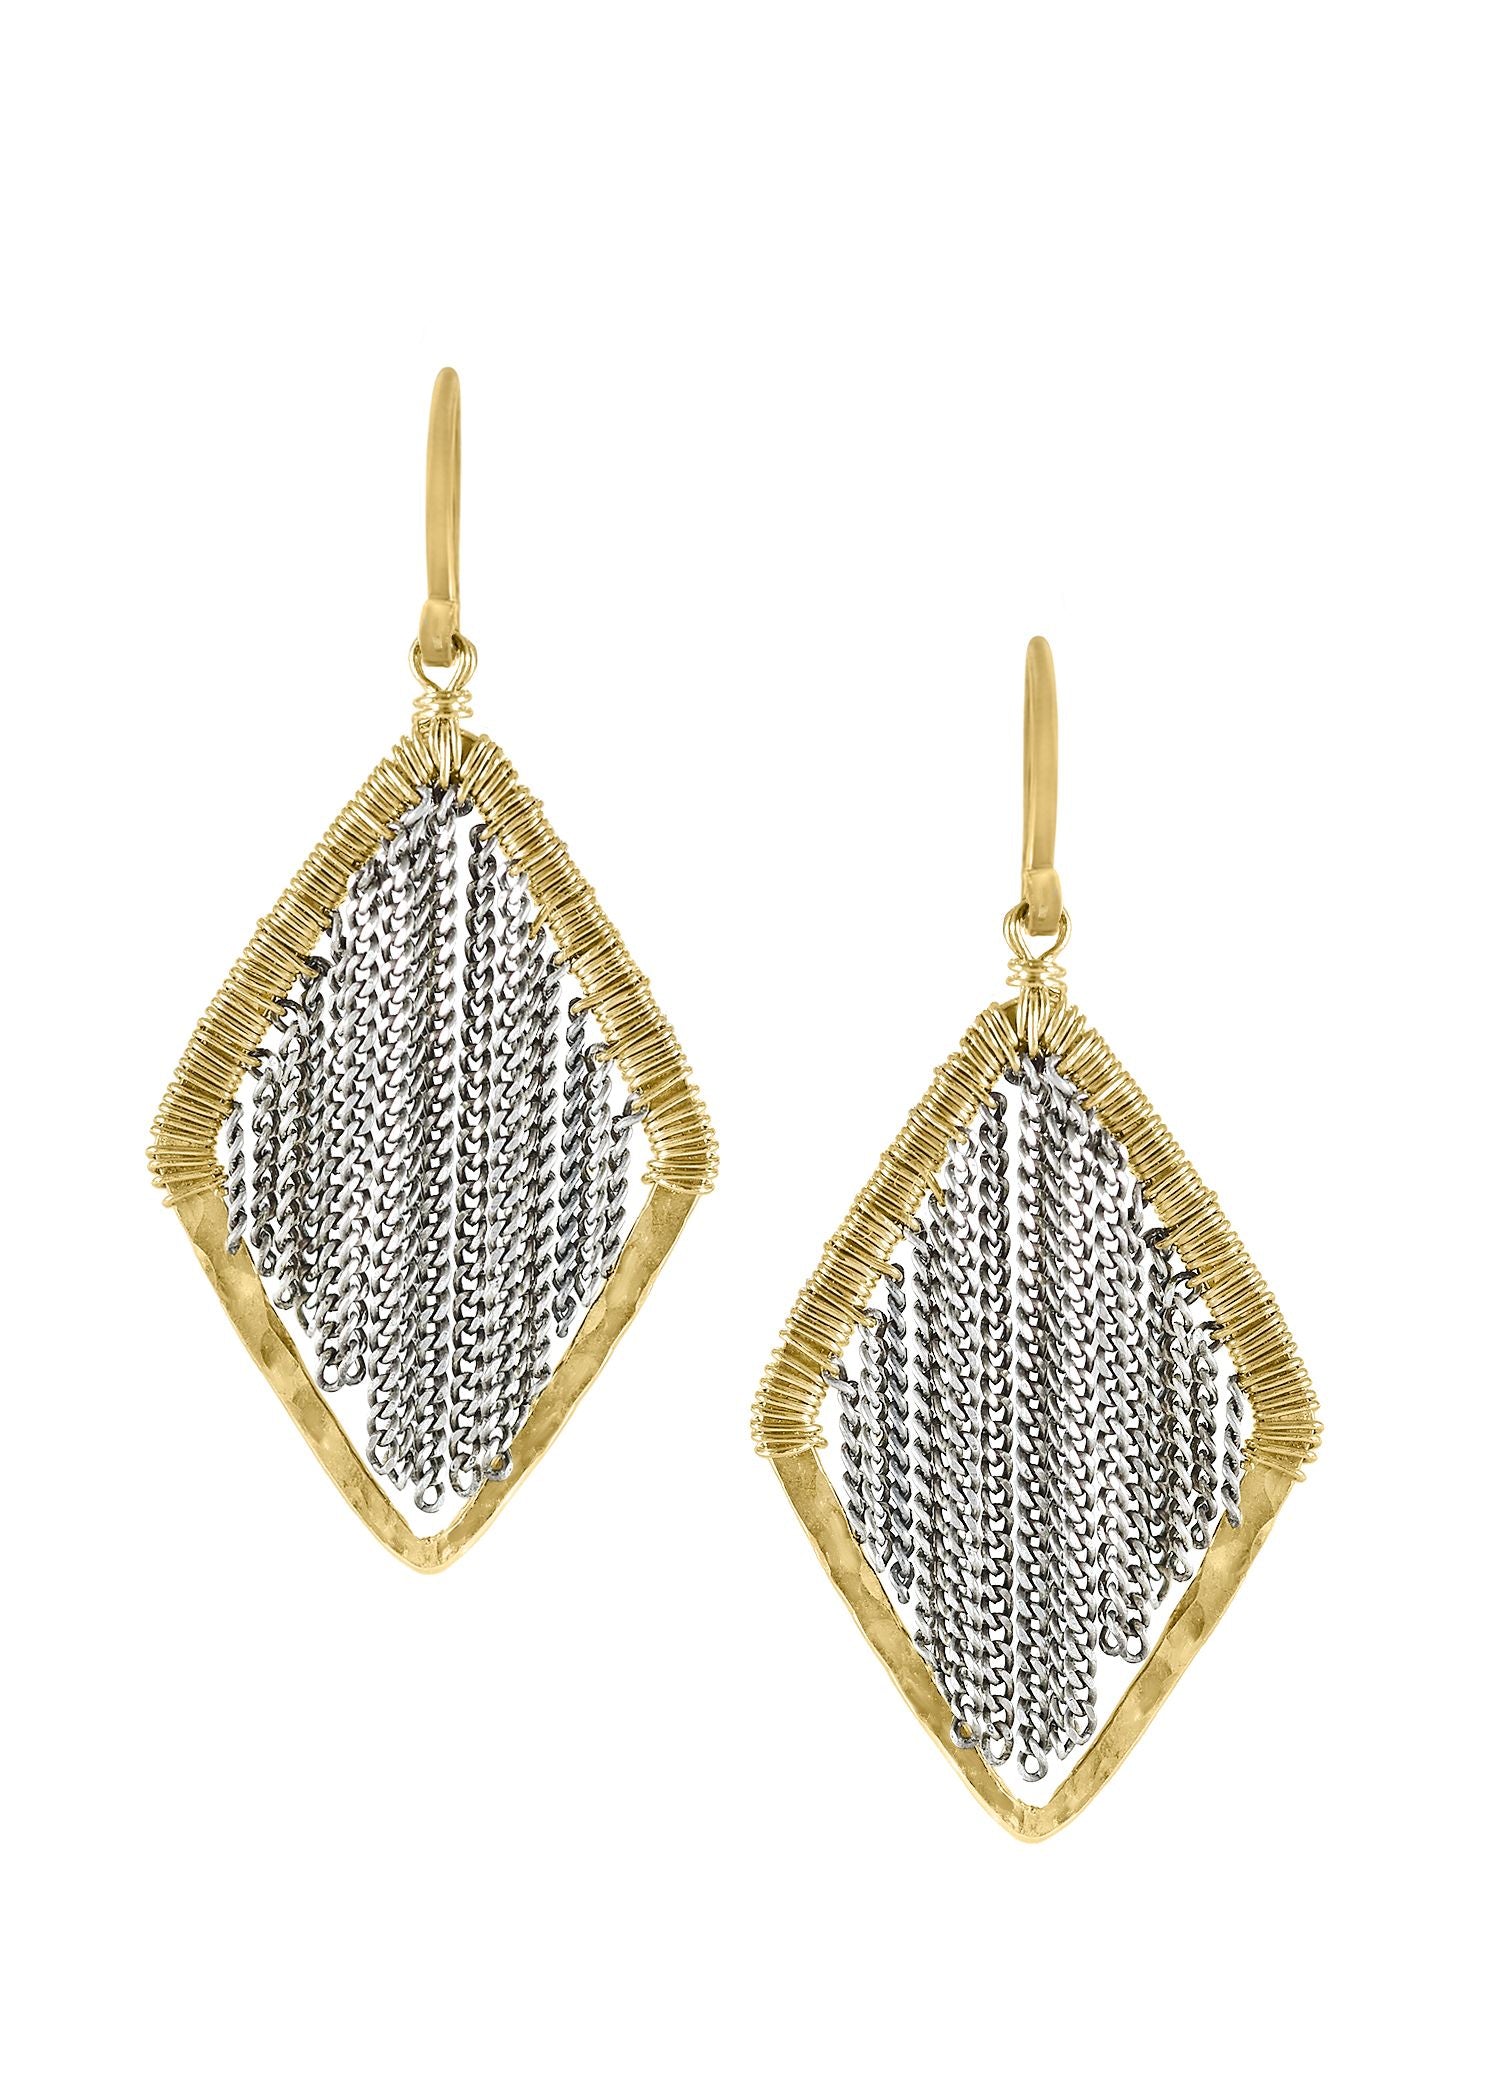 14k gold fill Sterling silver Mixed metal Earrings measure 1-1/2" in length (including the ear wires) and 11/16" in width Handmade in our Los Angeles studio